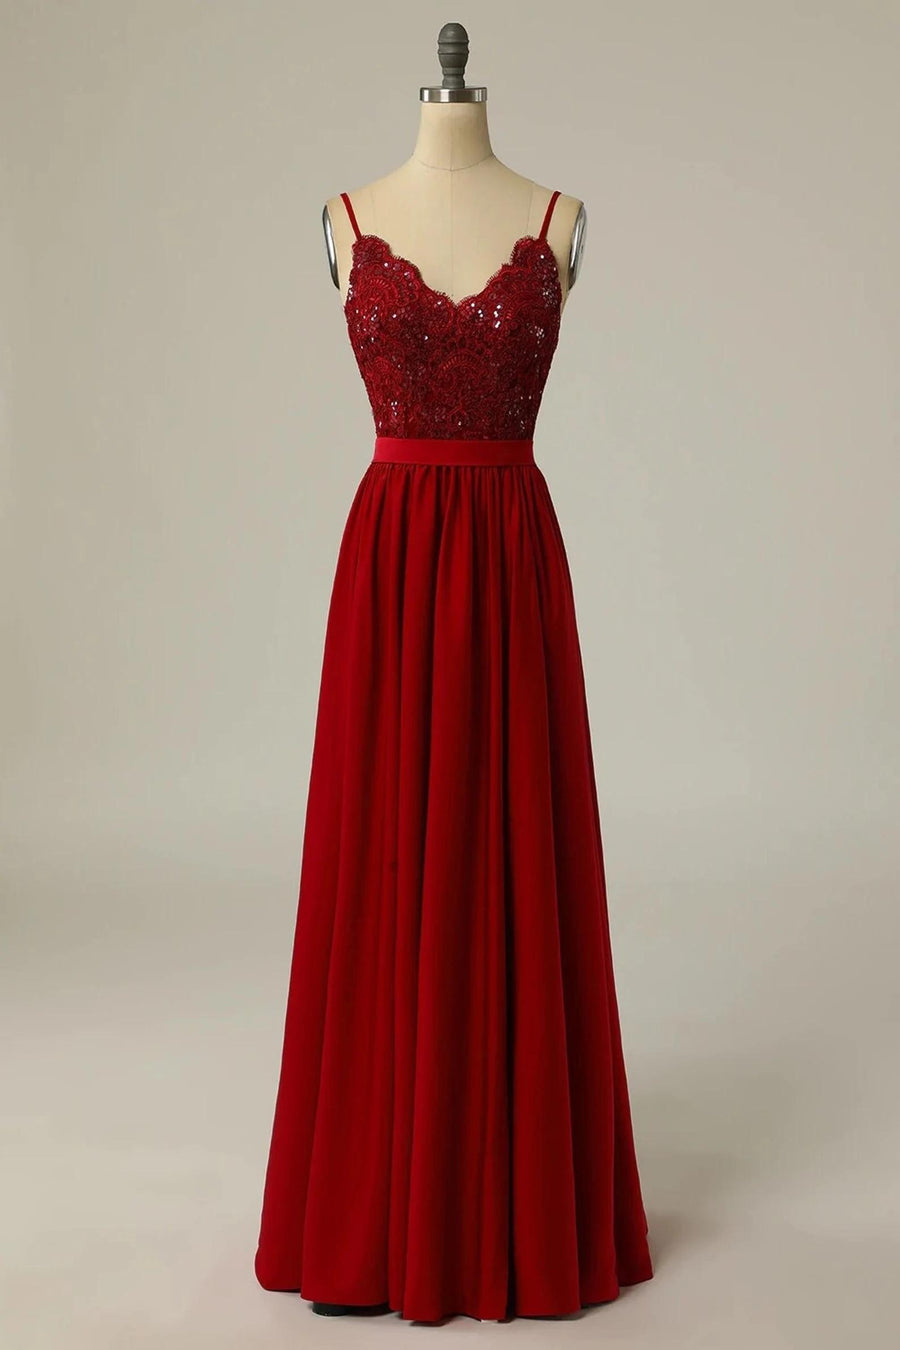 Red Lace Straps Banded Waist Bridesmaid Dress